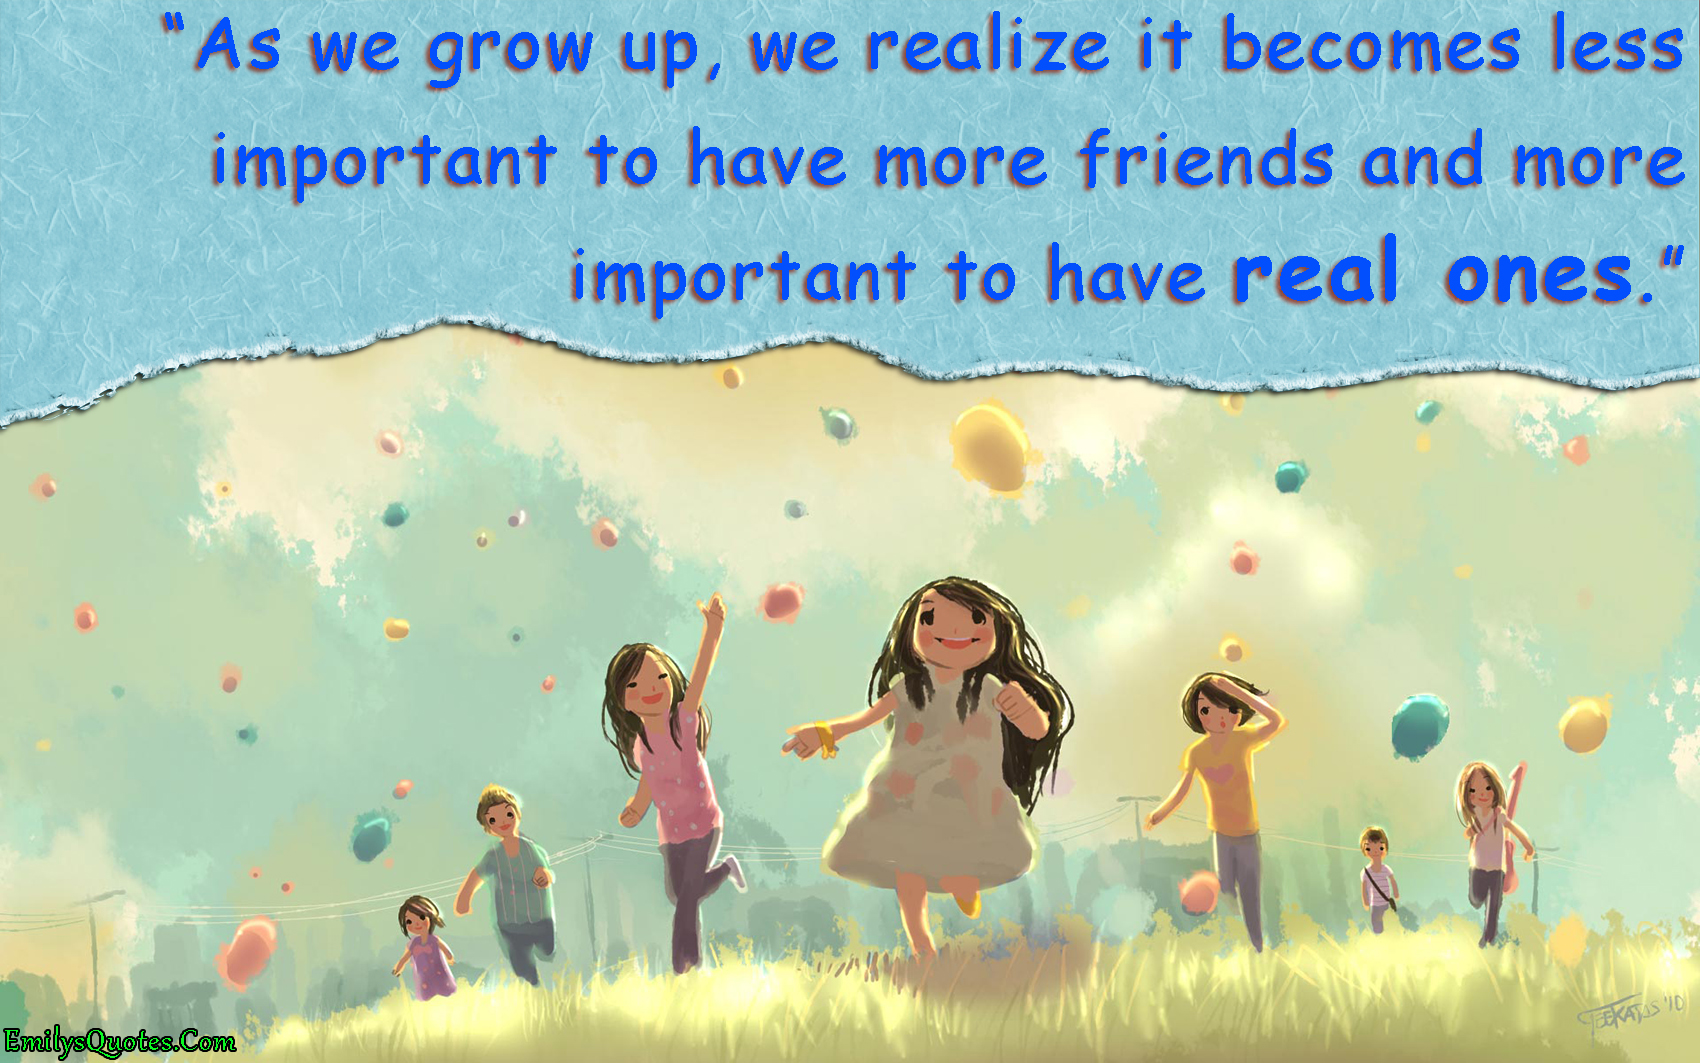 As we grow up, we realize it becomes less important to have more friends and more important to have real ones